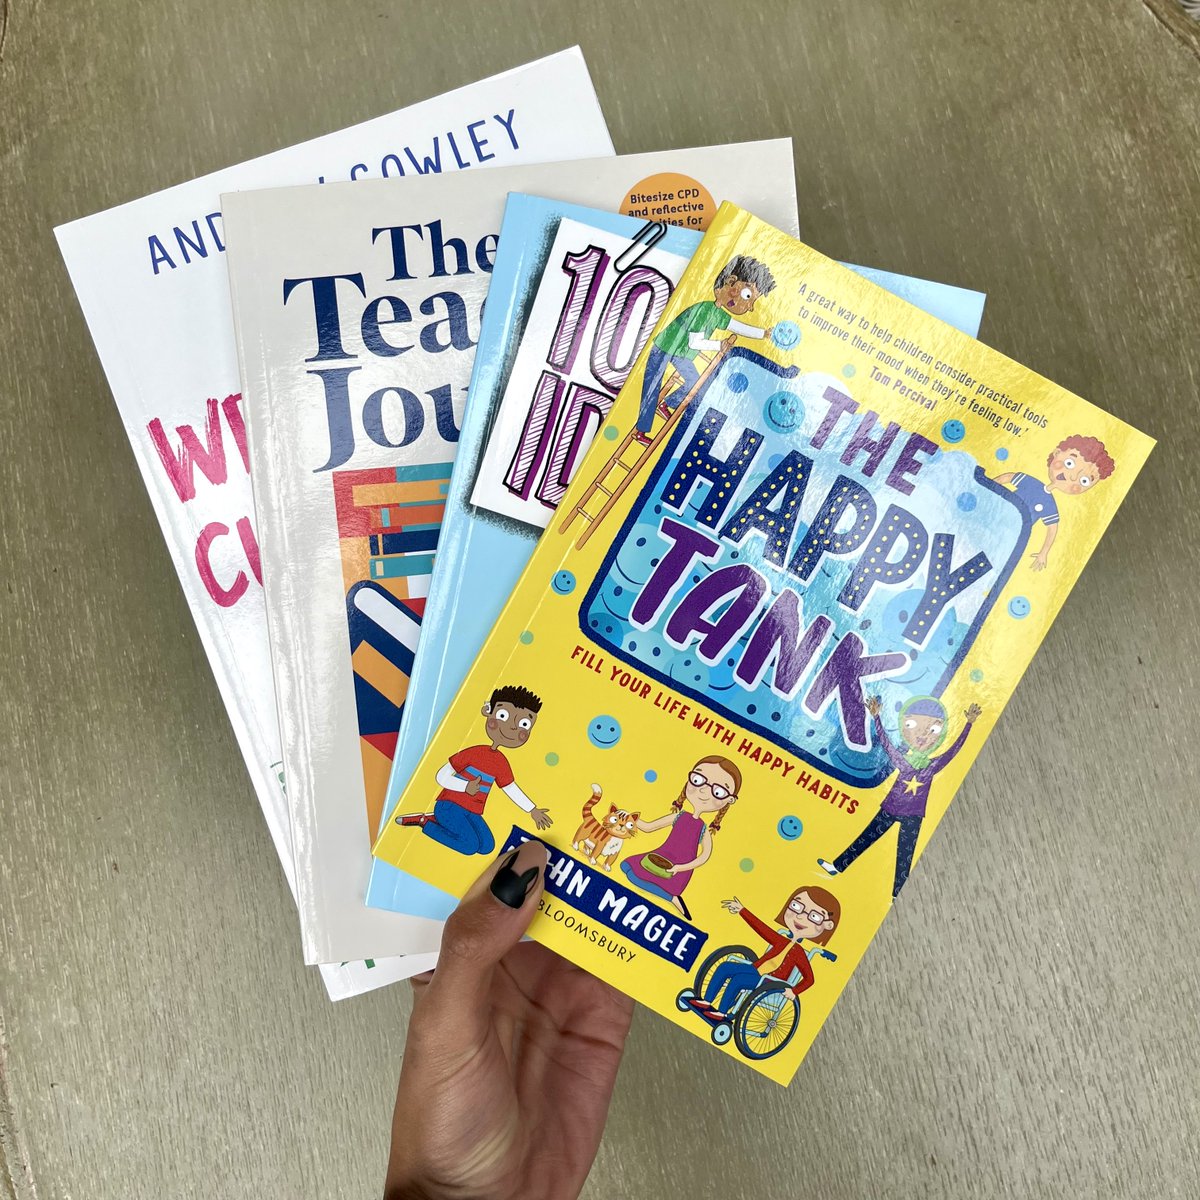 WIN A BUNDLE OF WELLBEING BOOKS 📚 

This #MentalHealthAwarenessWeek we're giving away a bundle of Bloomsbury Education wellbeing books!

To enter simply follow us + like and retweet this tweet by 20.05.2023. UK & IRL only. #EduTwt

View T&Cs: bit.ly/3UWm4OO